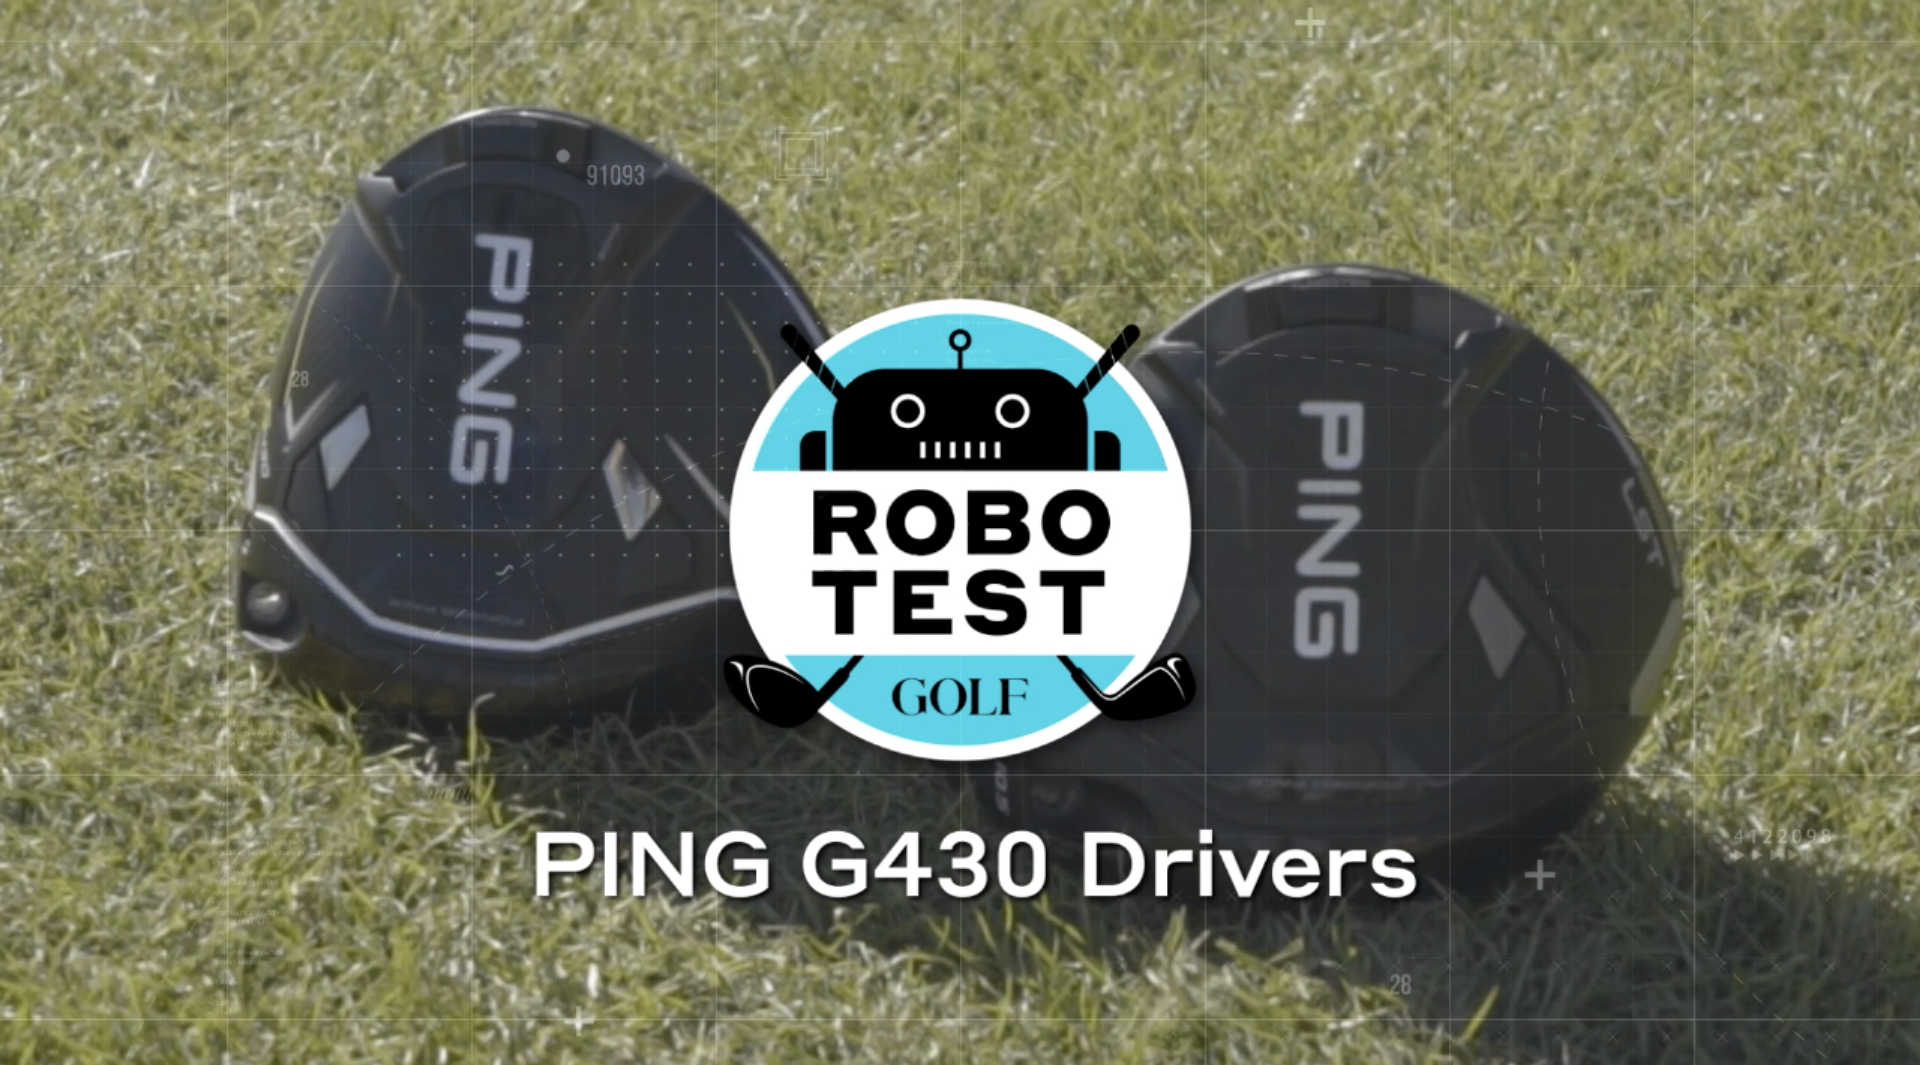 What our RoboTest revealed about Ping's new G430 driver line